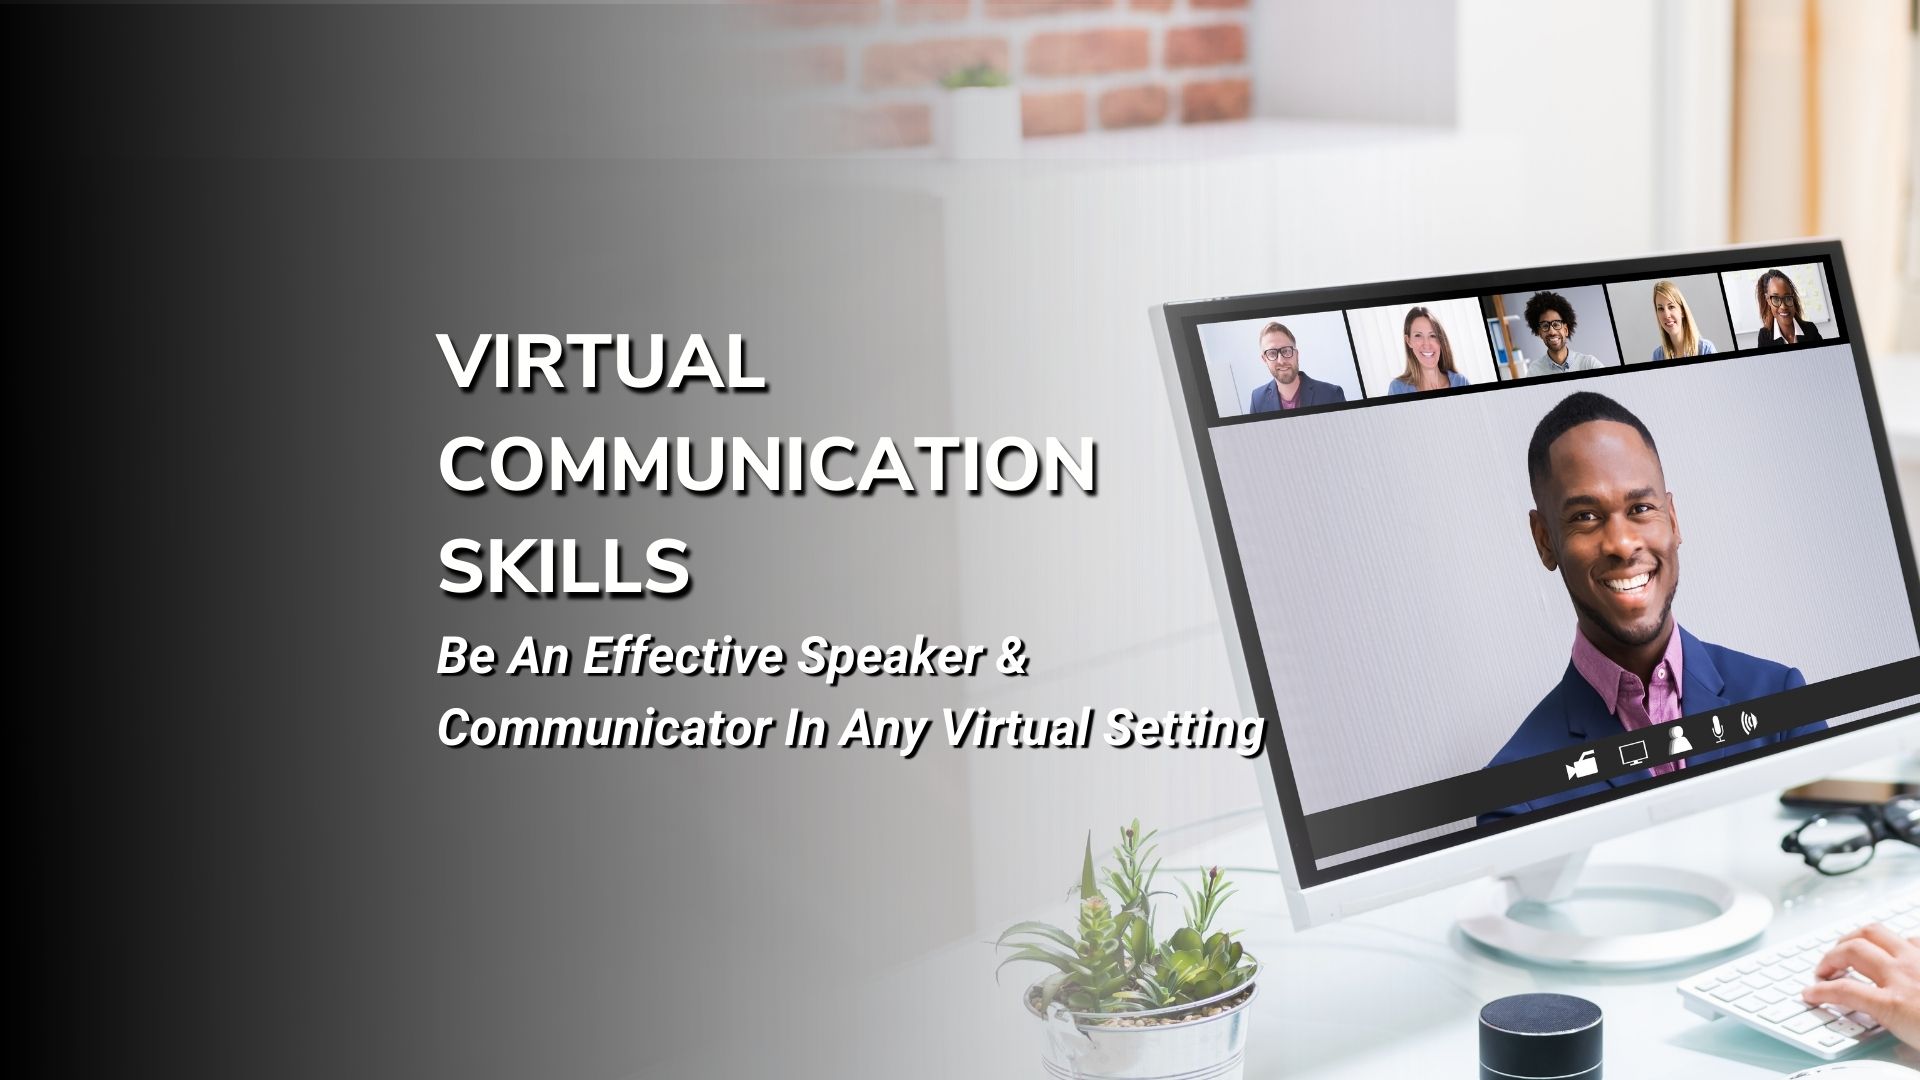 Video and Virtual Communication Skills - Live Online Class, Online Event